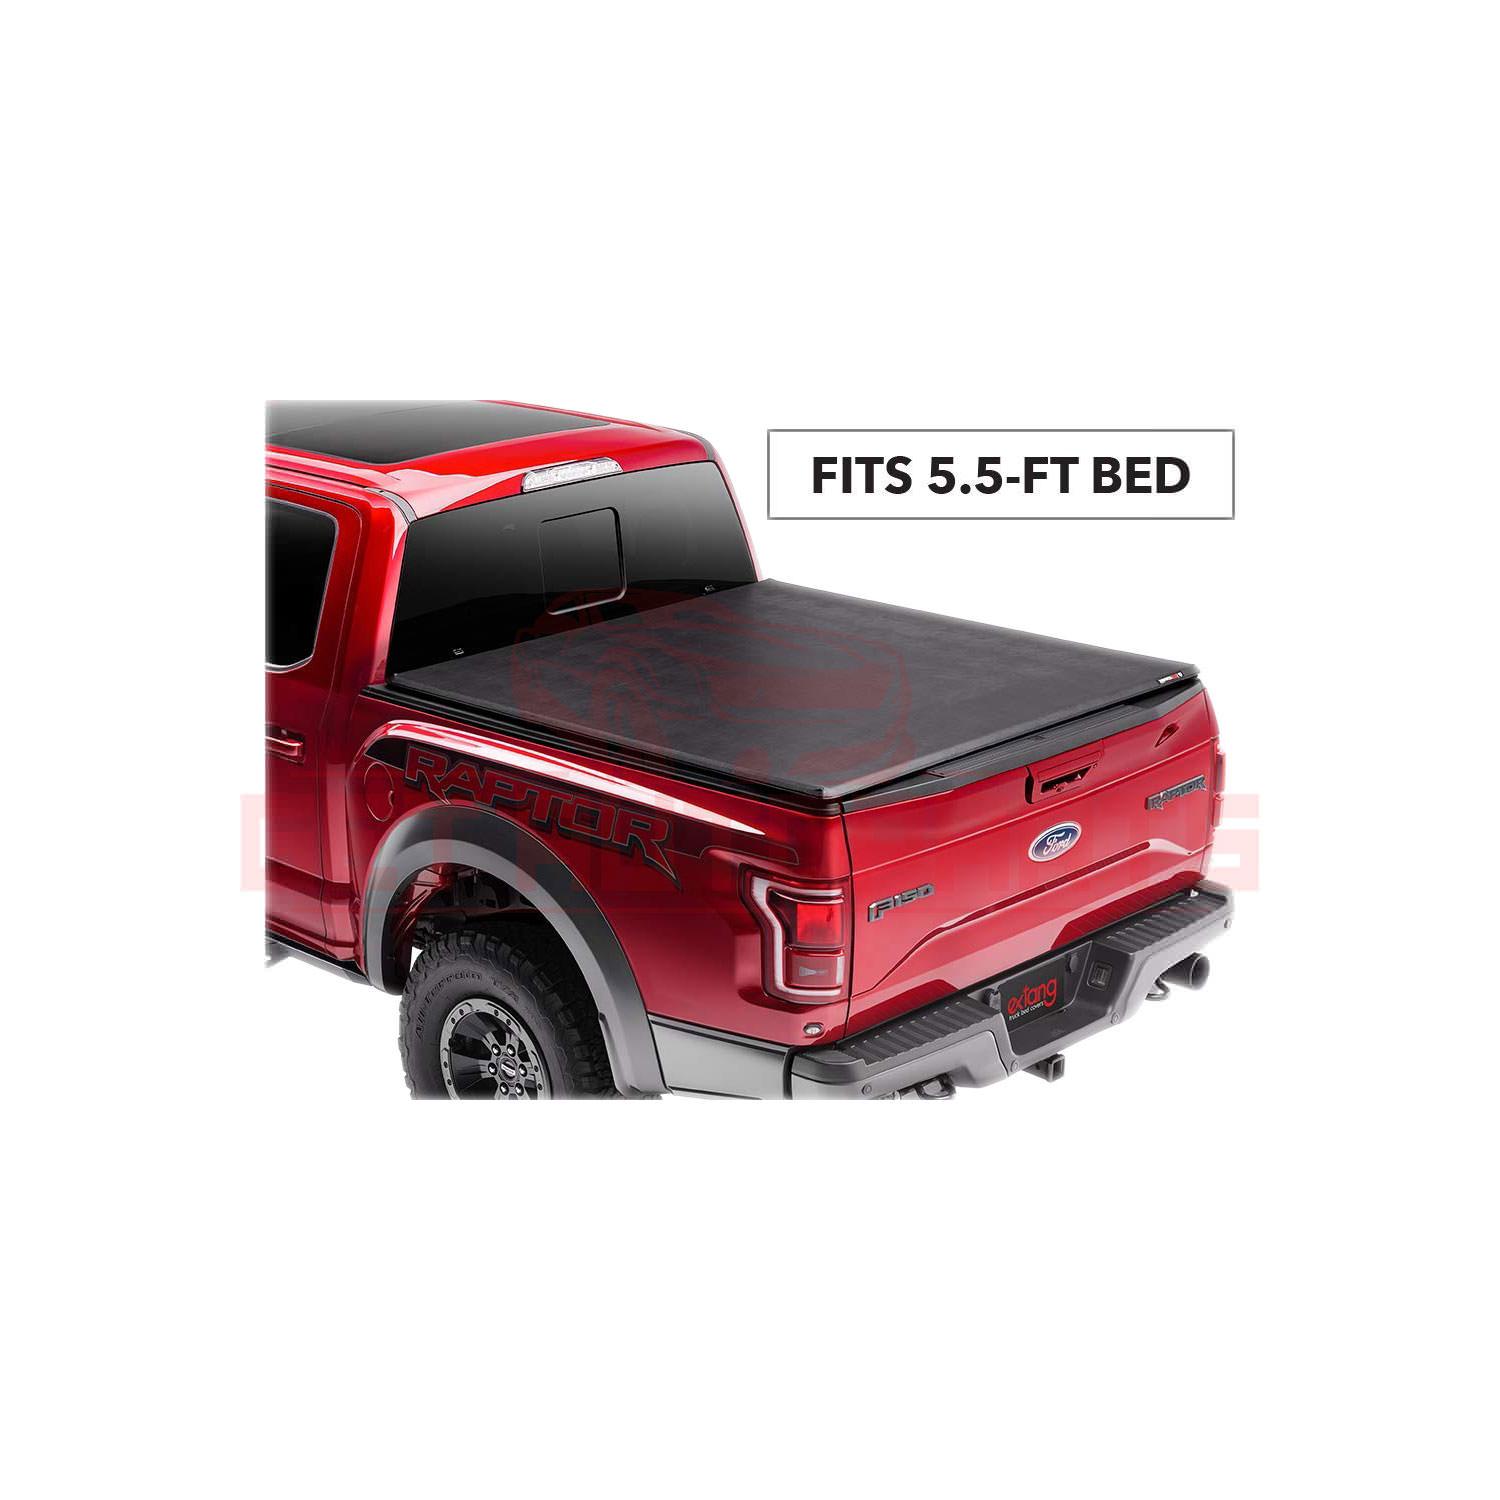 Extang Tonneau Cover for Ford F150 200103 eBay